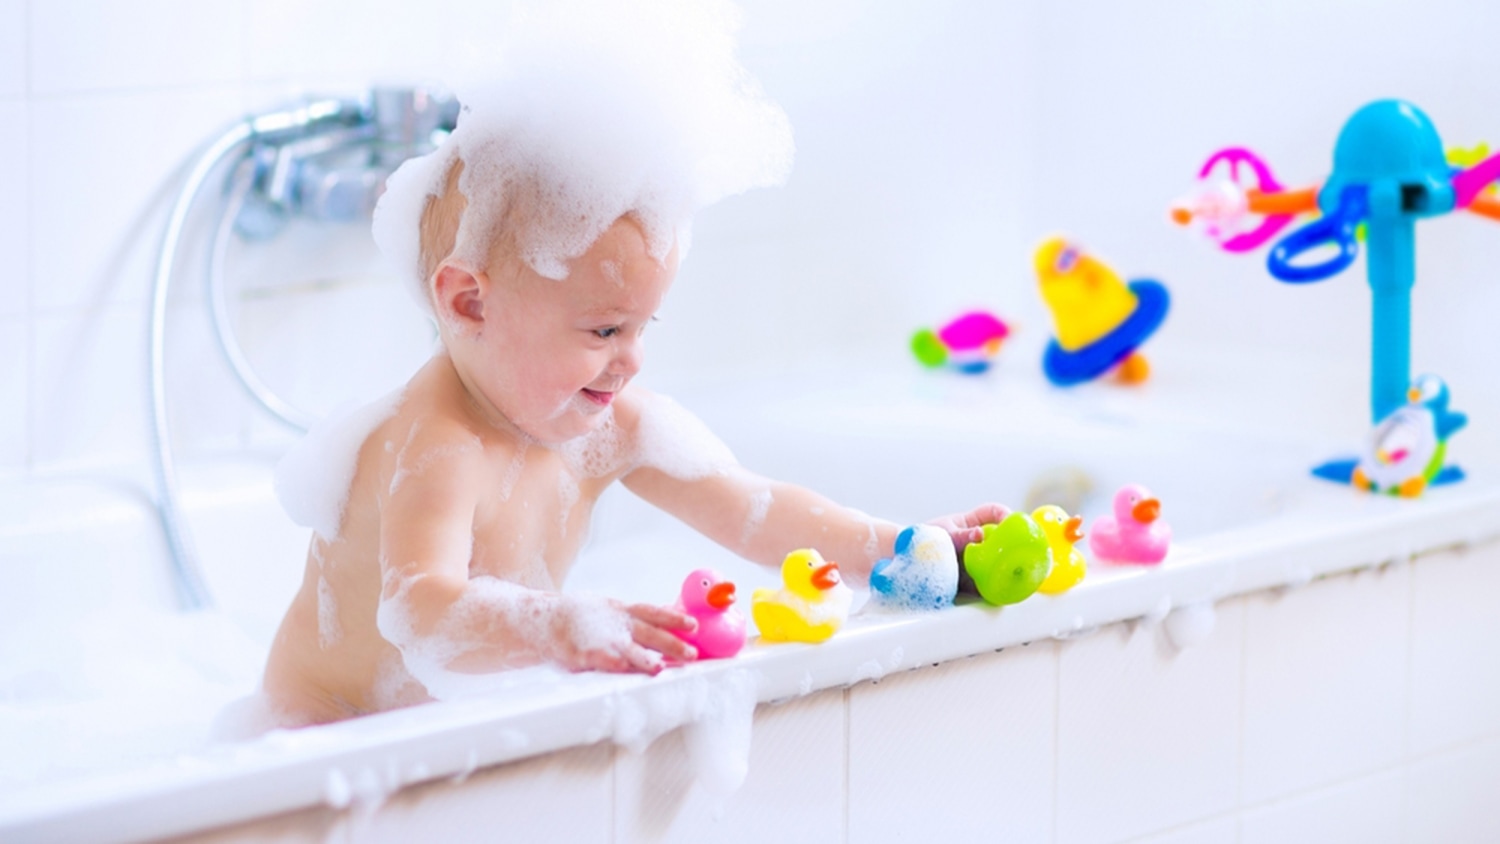 Baby Products Online - bath toys for children, bath toys for baby, bath toys  for children bath toy for baby bath toy for toddlers for preschoolers bath  toys for babies age 1